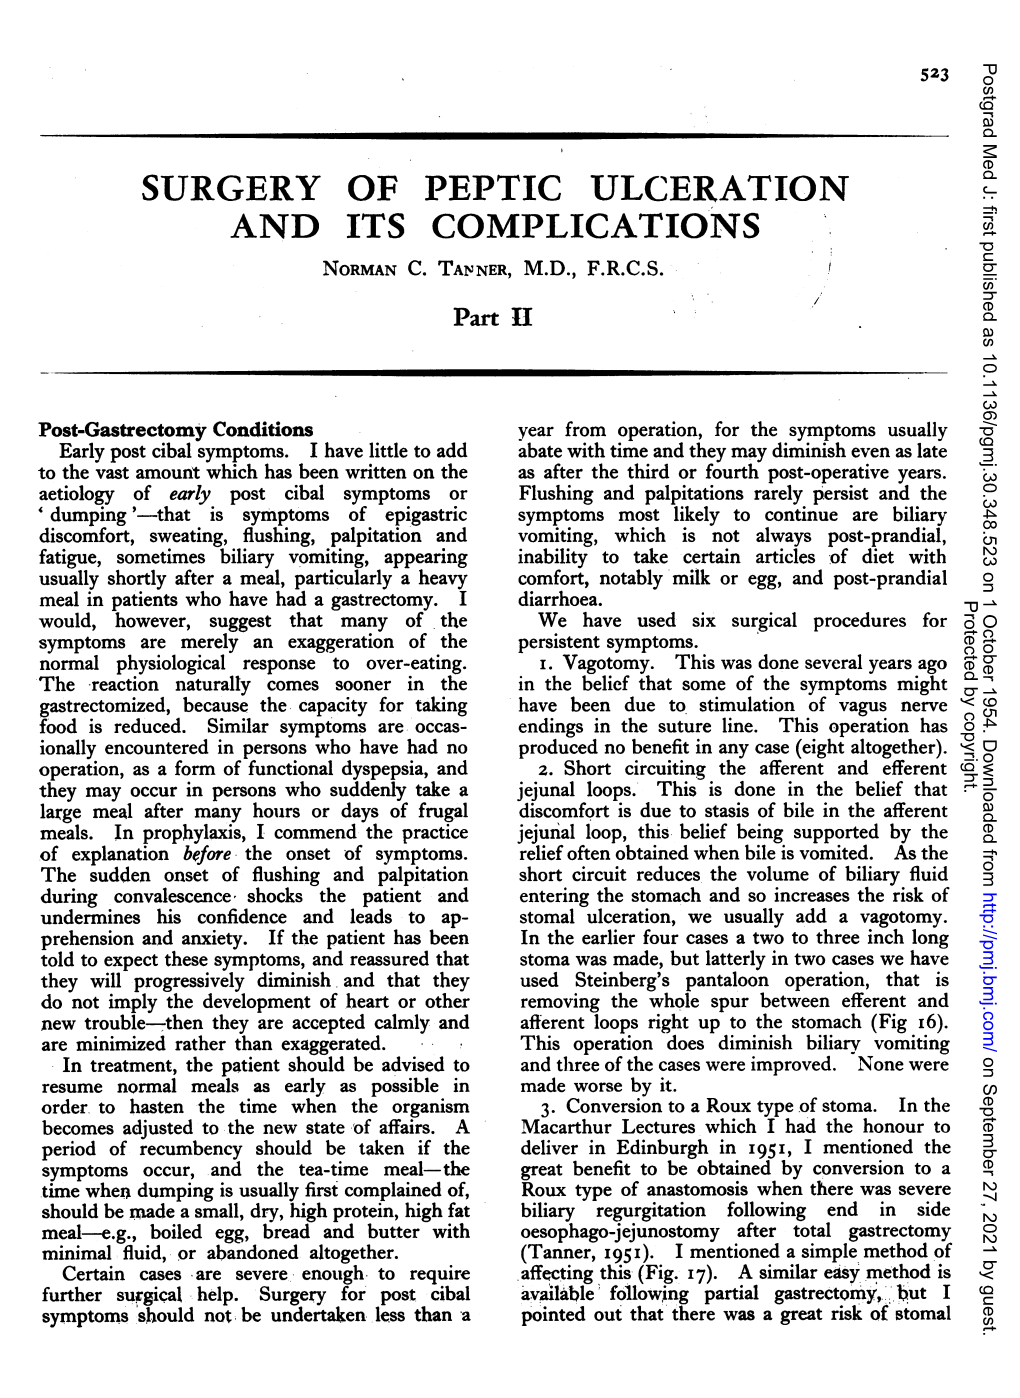 Surgery of Peptic Ulceration and Its Complications Norman C